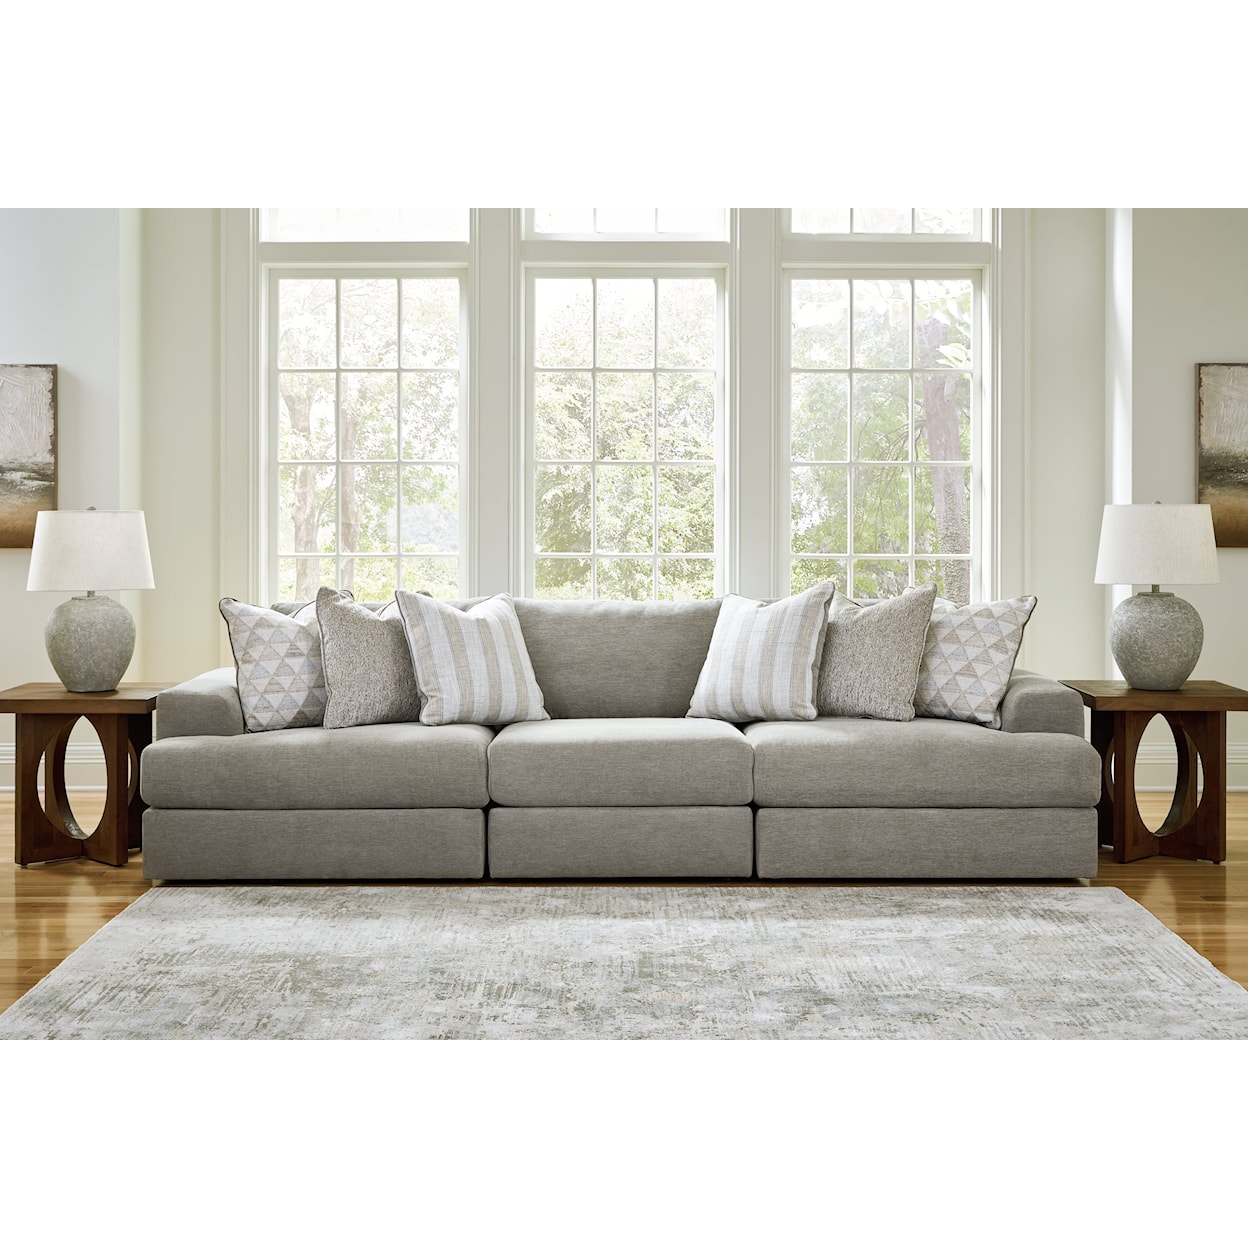 Benchcraft Avaliyah 3-Piece Sectional